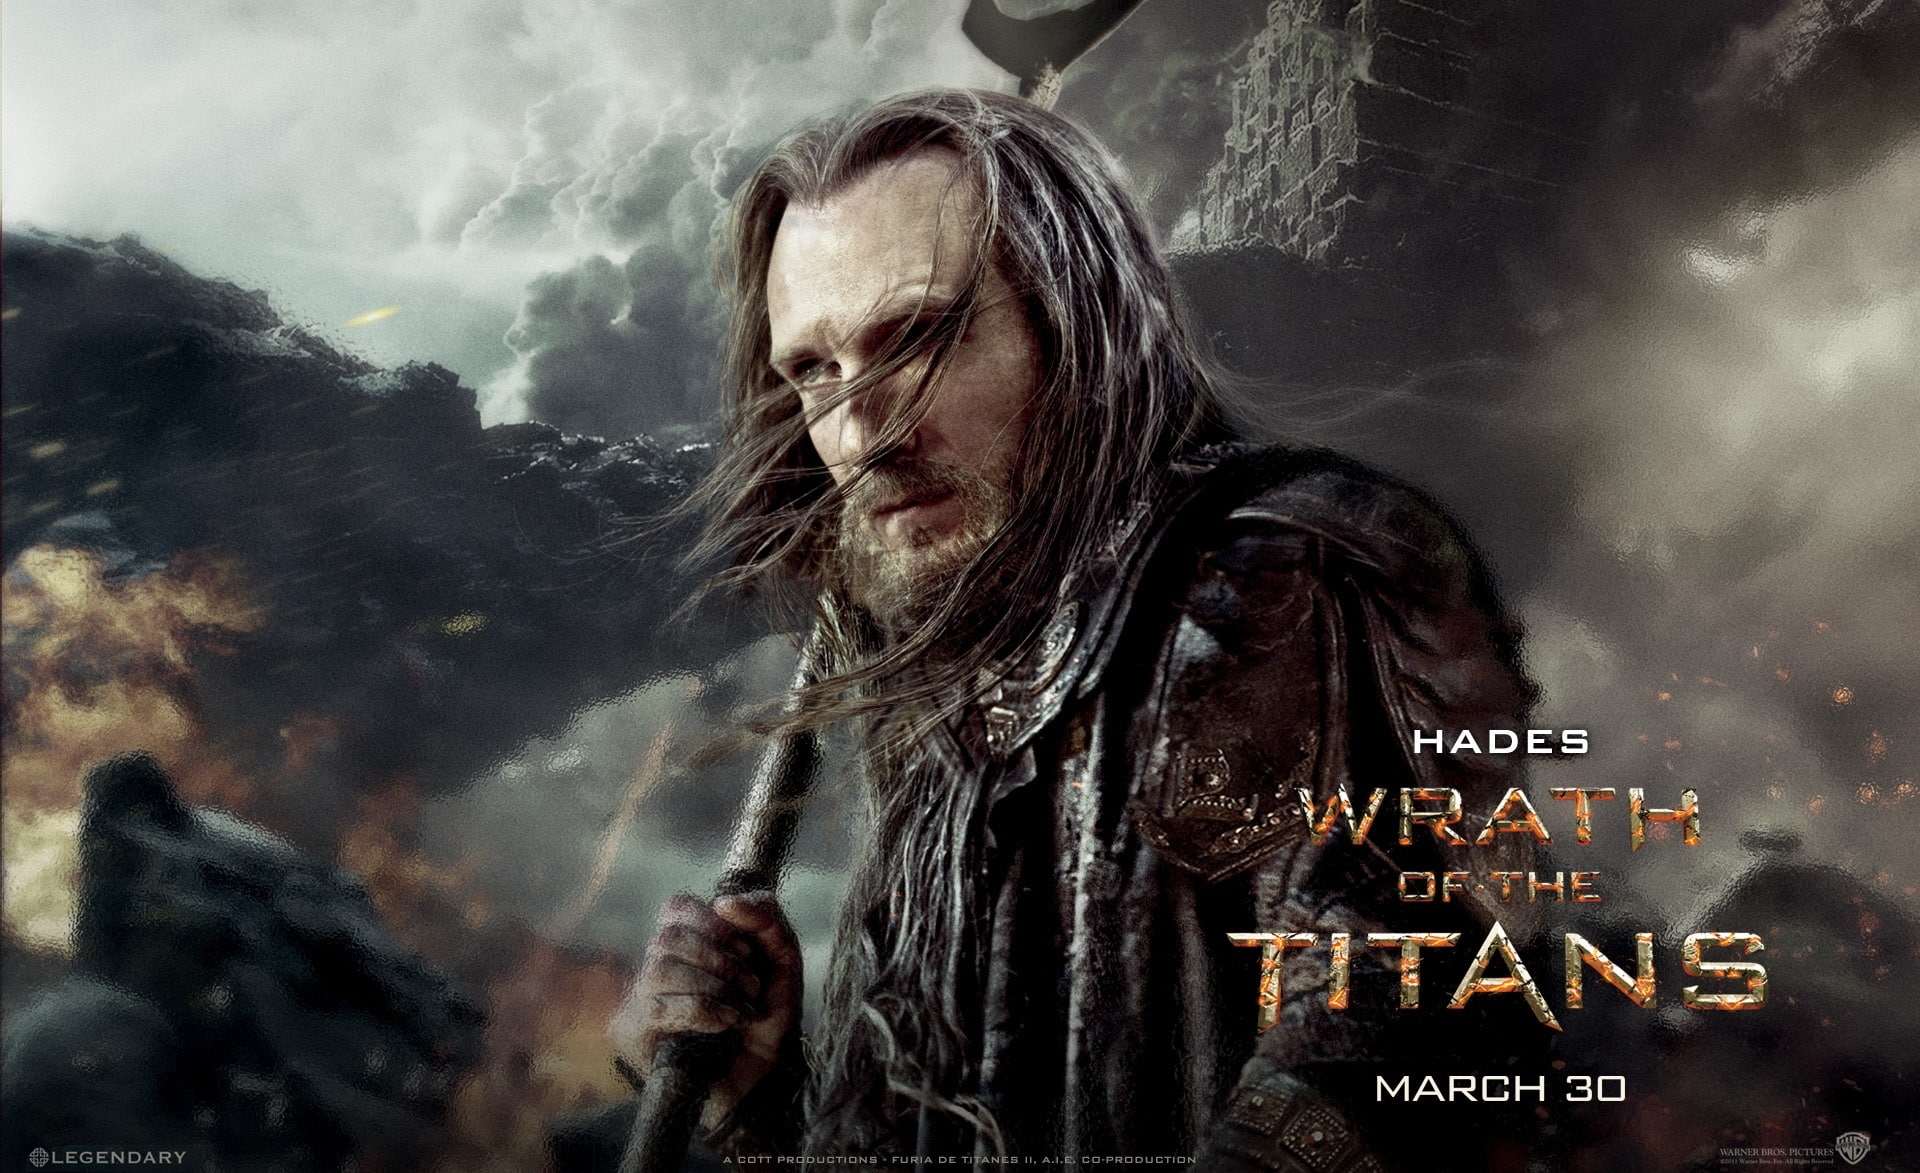 Wrath Of The Titans Hades, Wrath of the Titans wallpaper, Movies